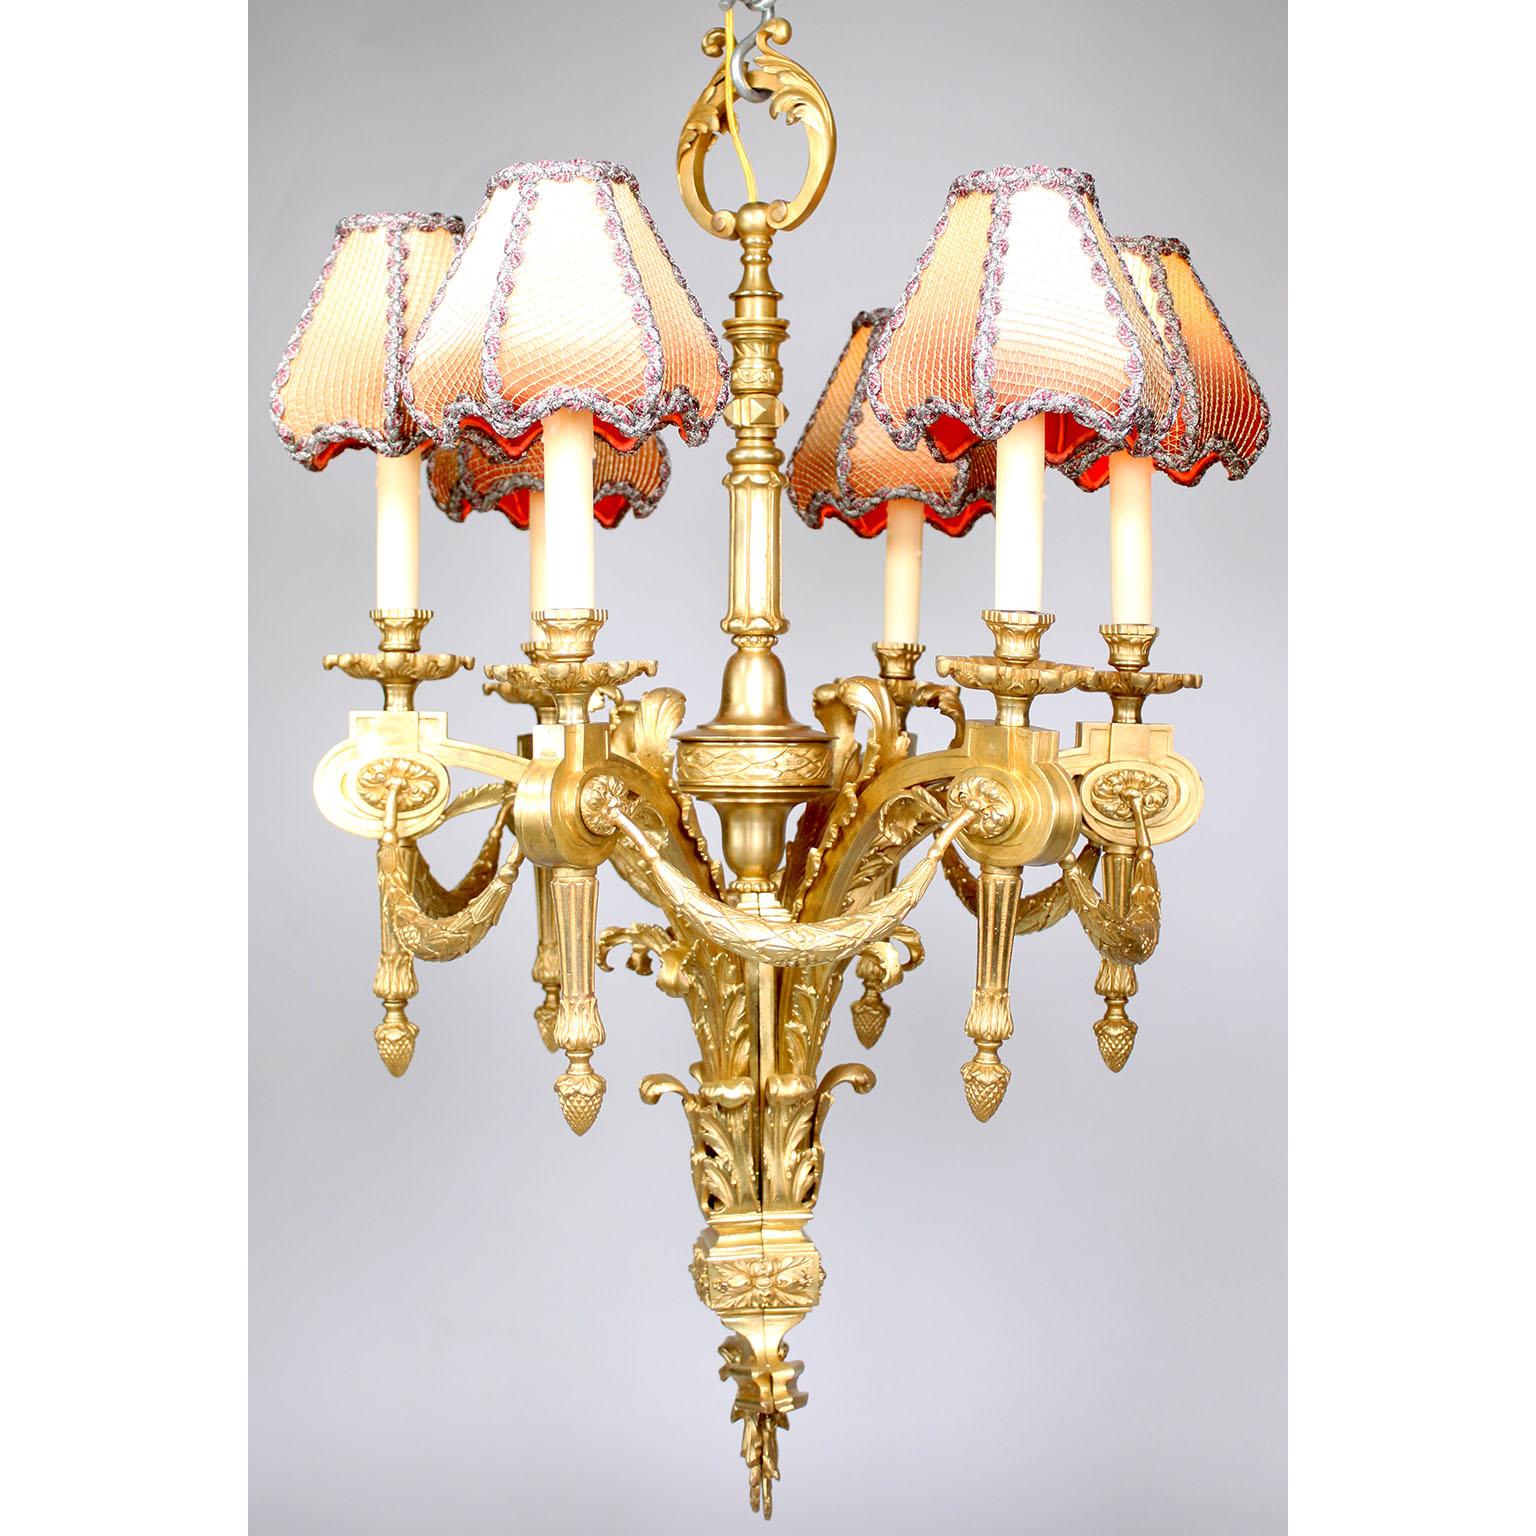 French 19th-20th Century Louis XVI Style Gilt Bronze Six-Light Chandelier In Good Condition For Sale In Los Angeles, CA